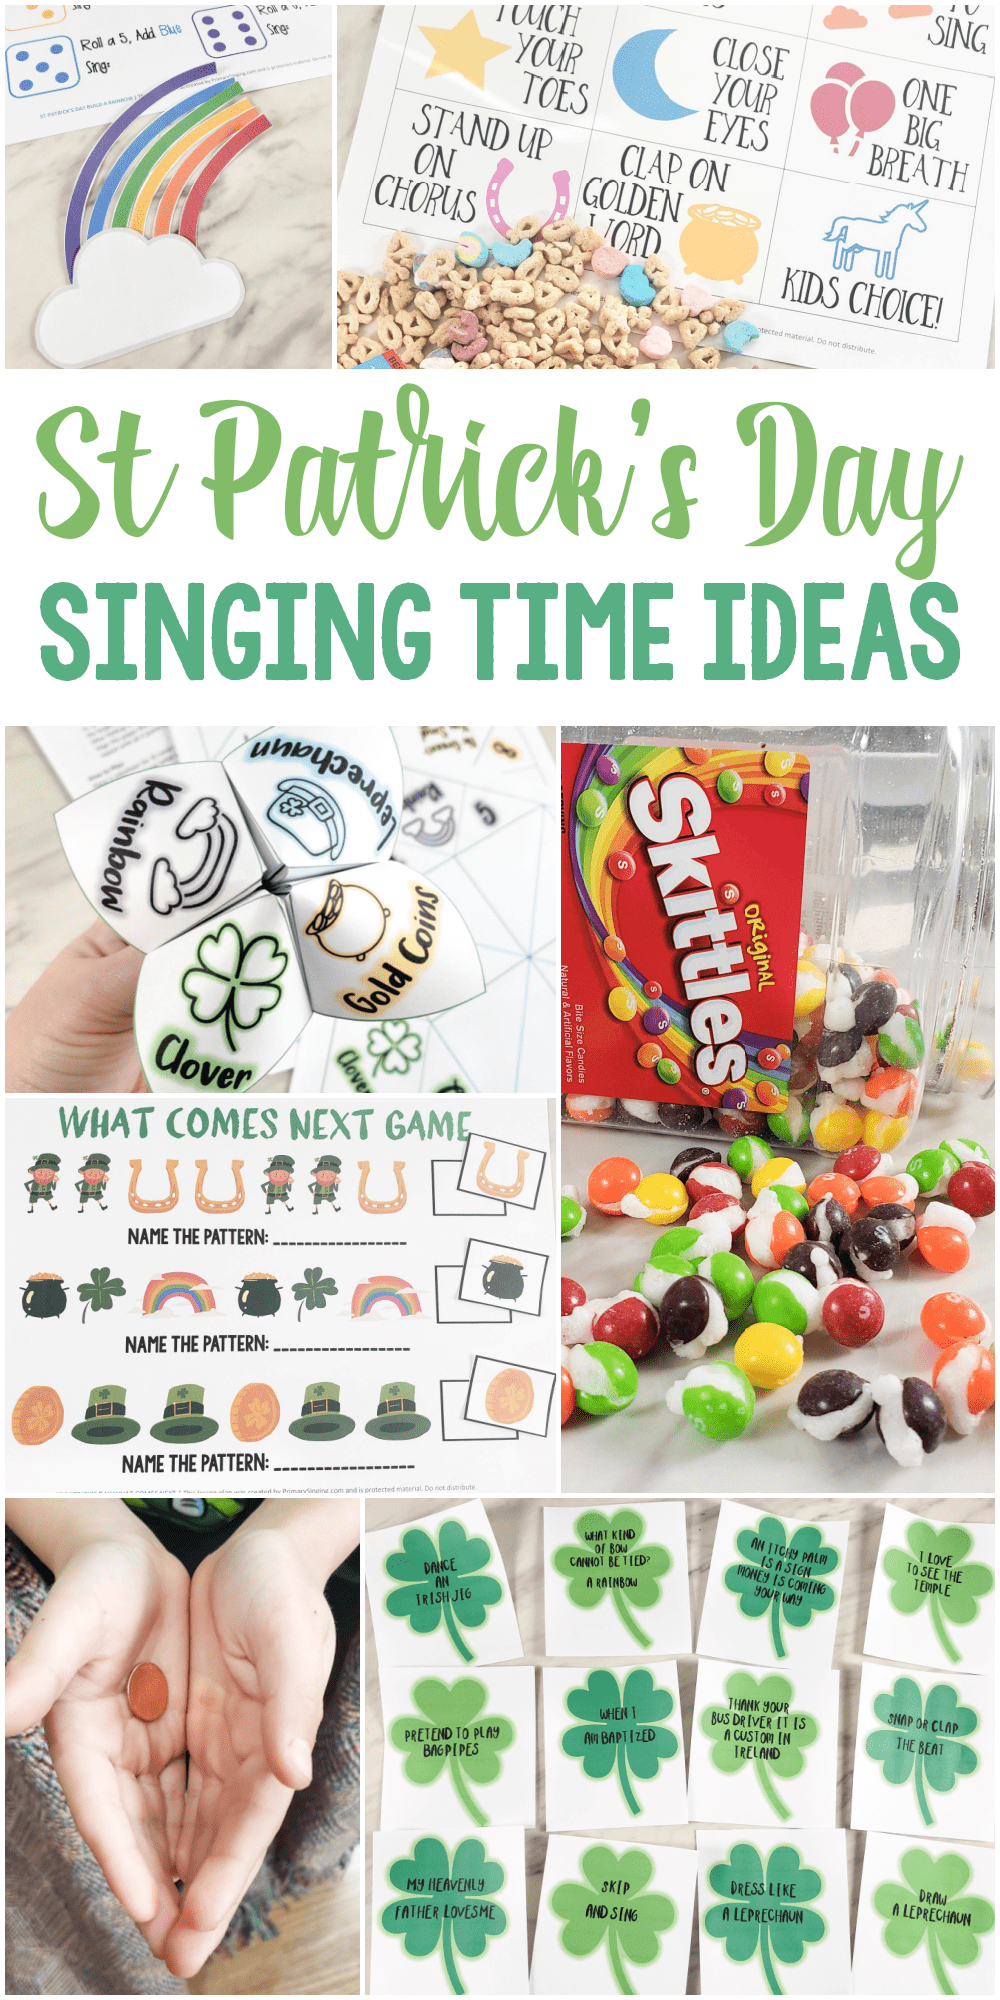 45 St Patrick's Day Primary Songs Easy ideas for Music Leaders St Patricks Day Singing Time Ideas